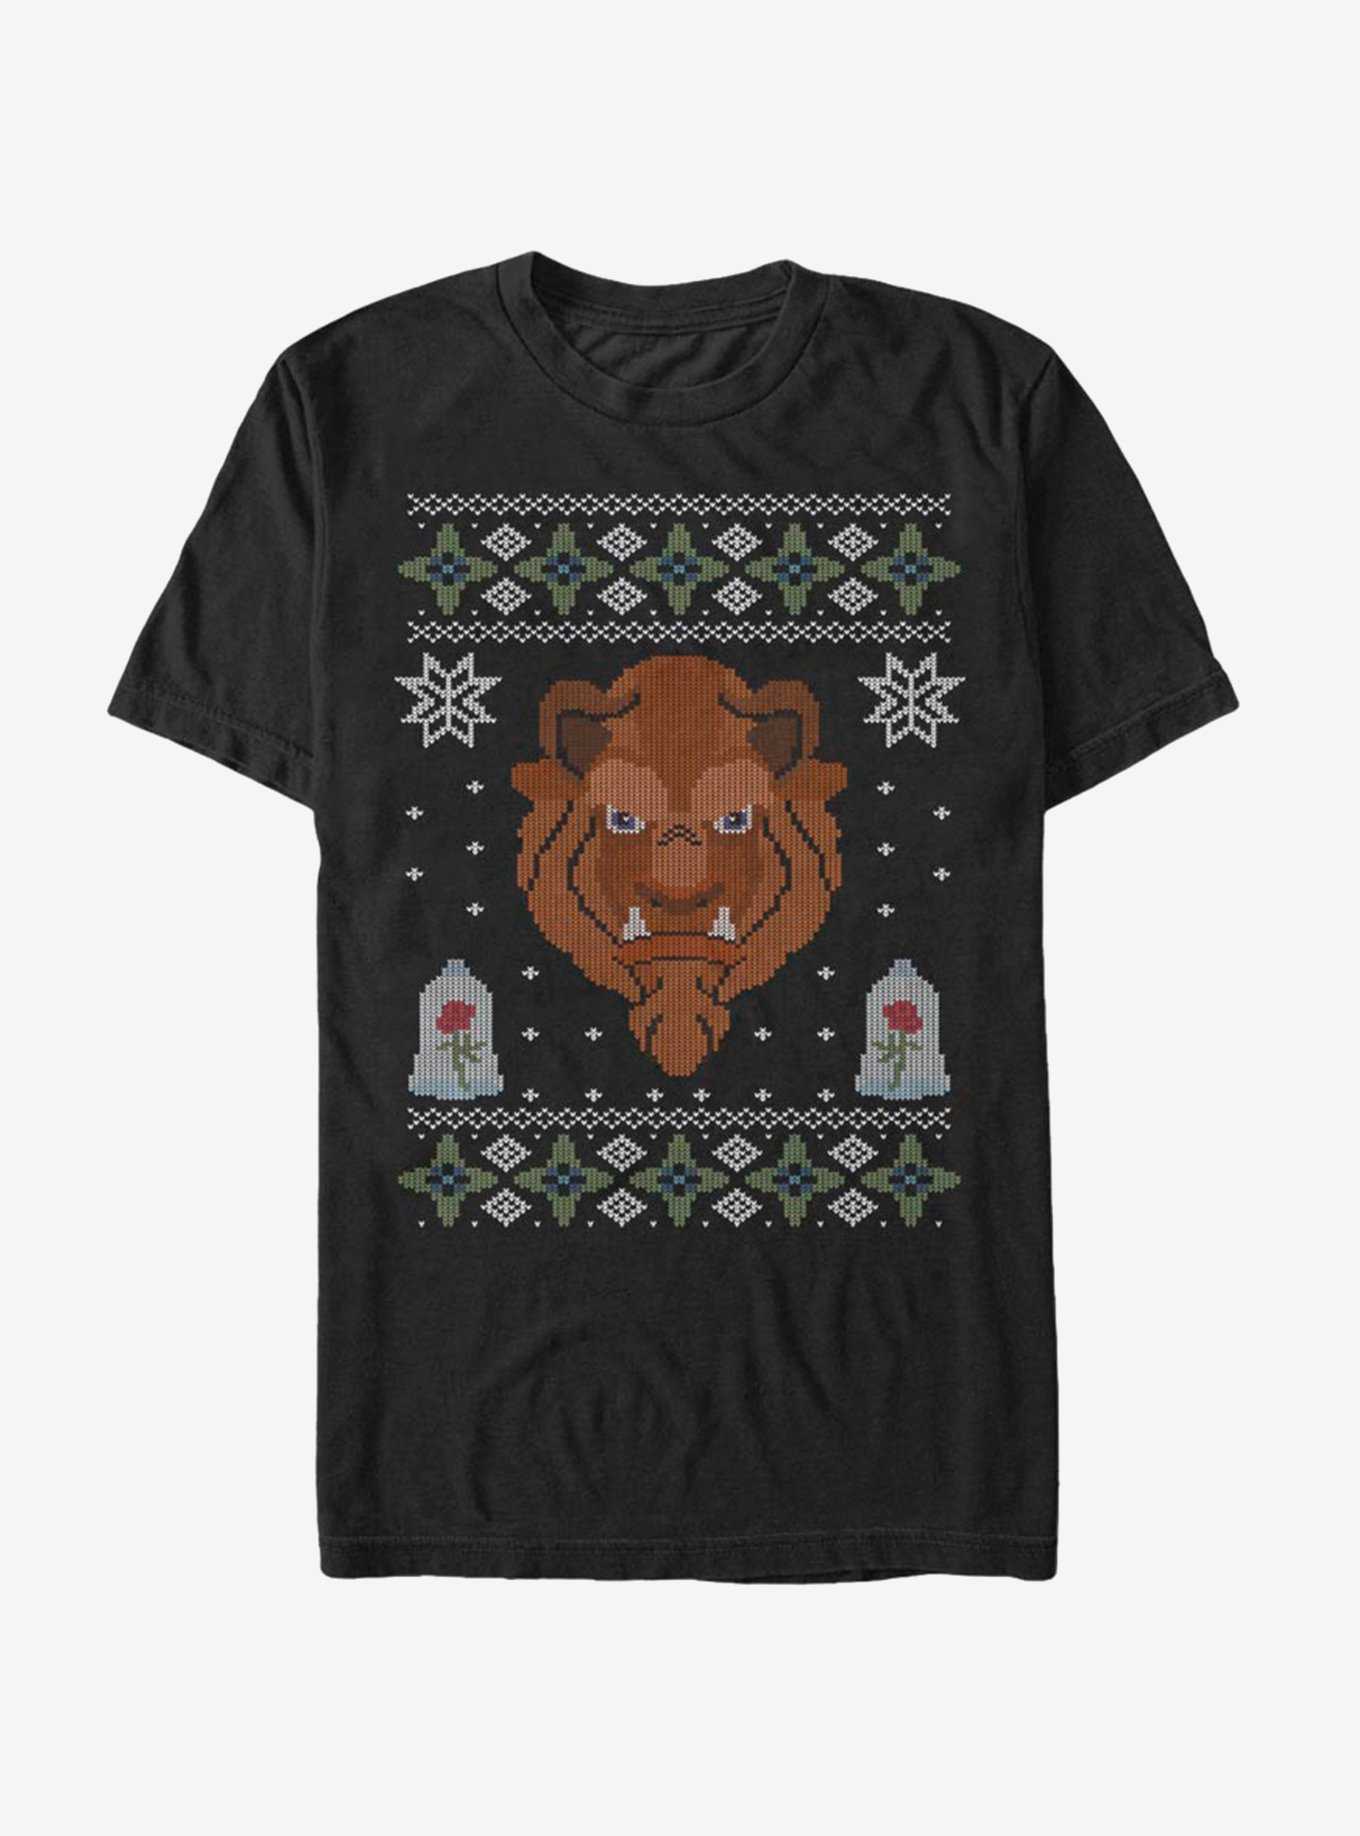 Disney Beauty And The Beast Christmas Pattern T-Shirt, , hi-res